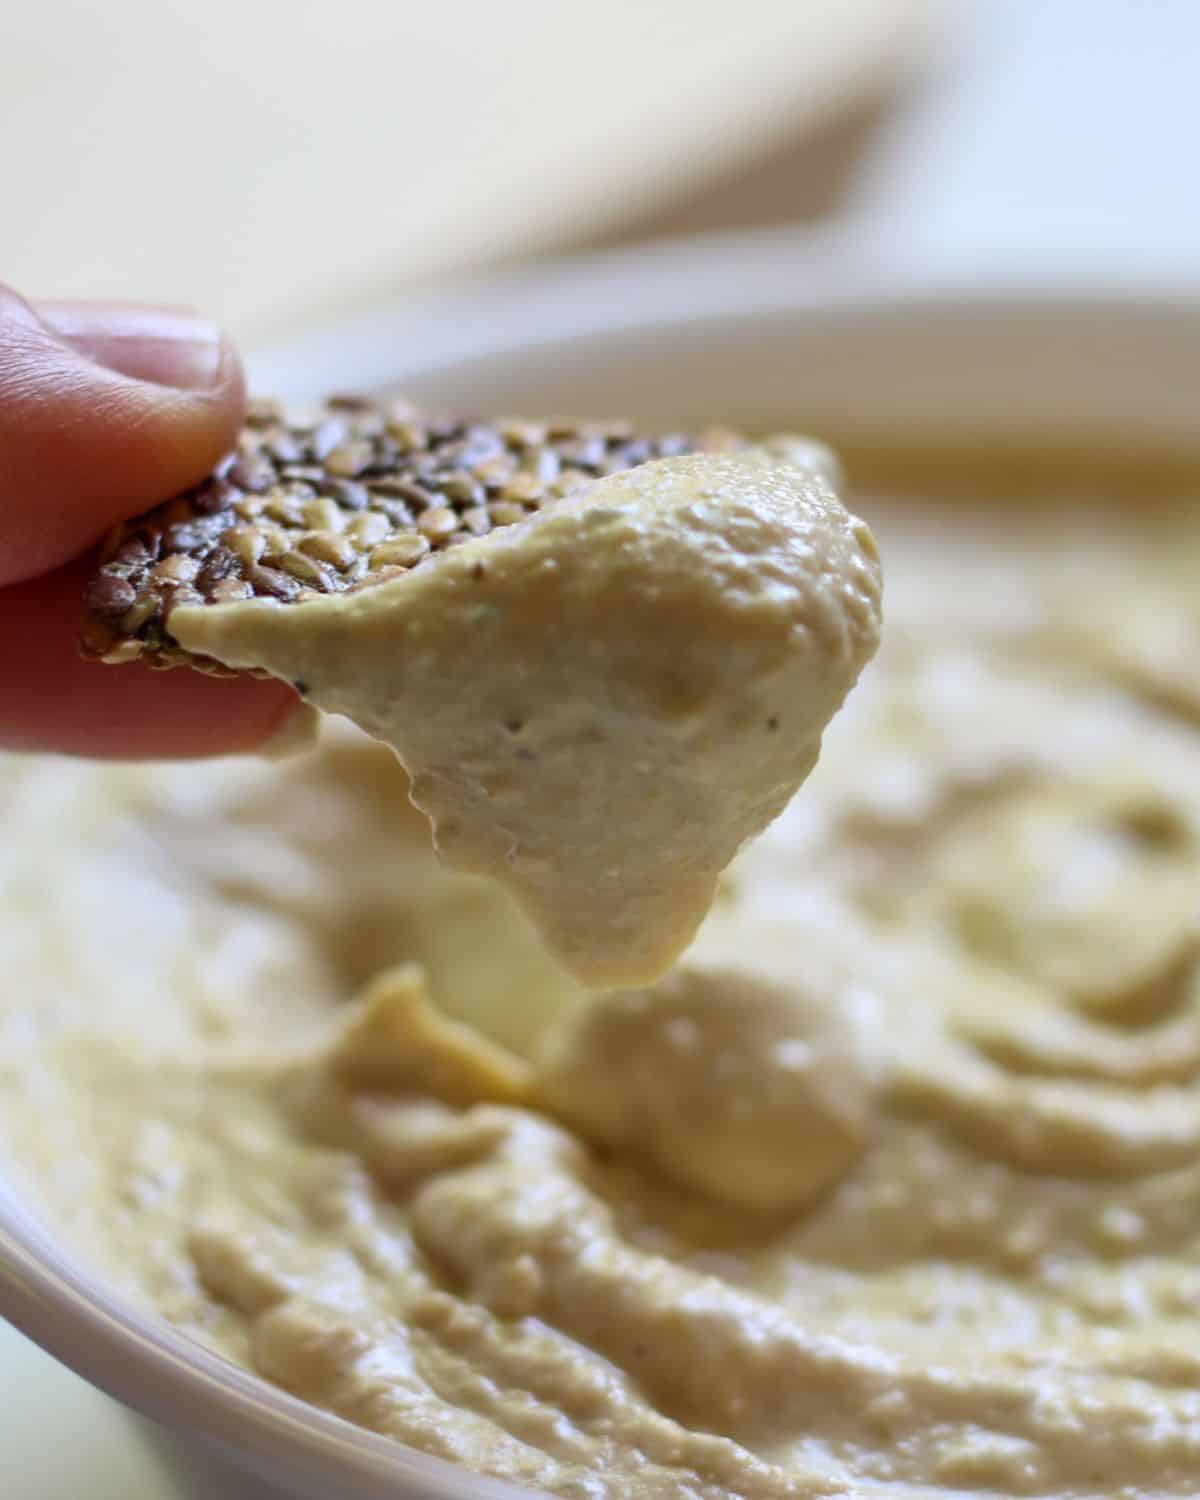 Close-up shot of a dark seed cracker dipped in hummus and held over the  blurred bowl in the background.